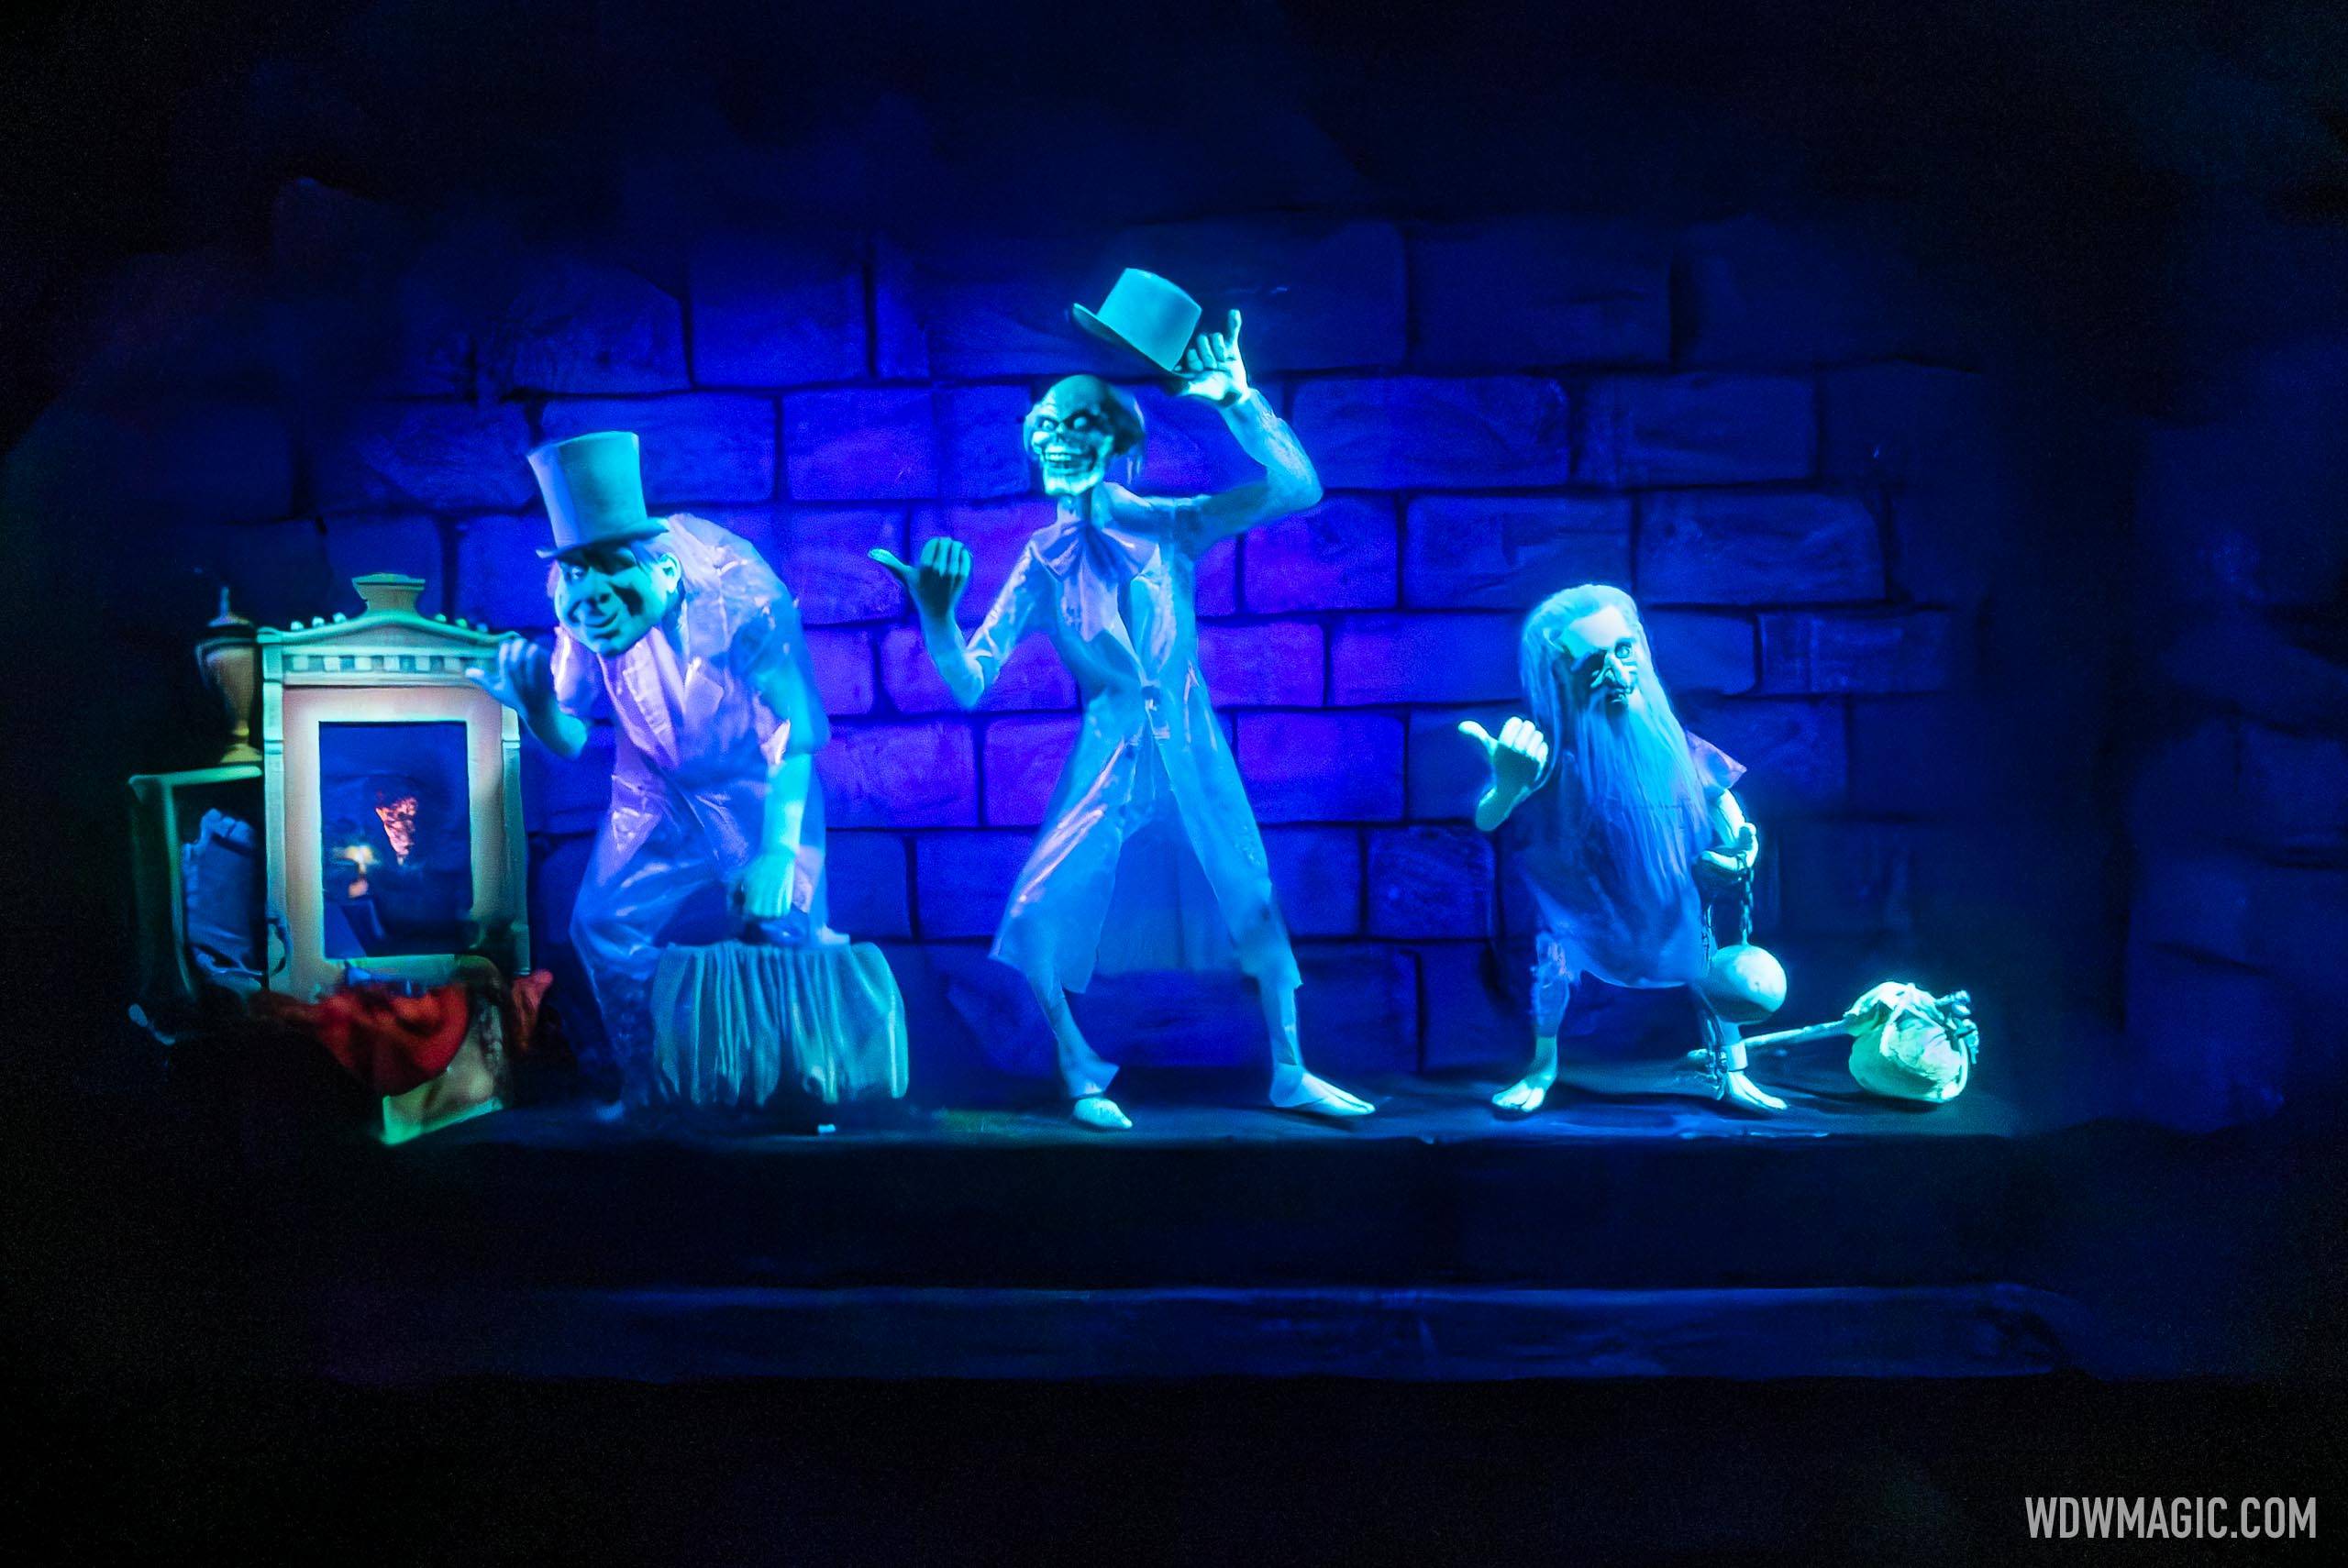 Animated figures return to the the Hitchhiking Ghost scene at the Haunted Mansion